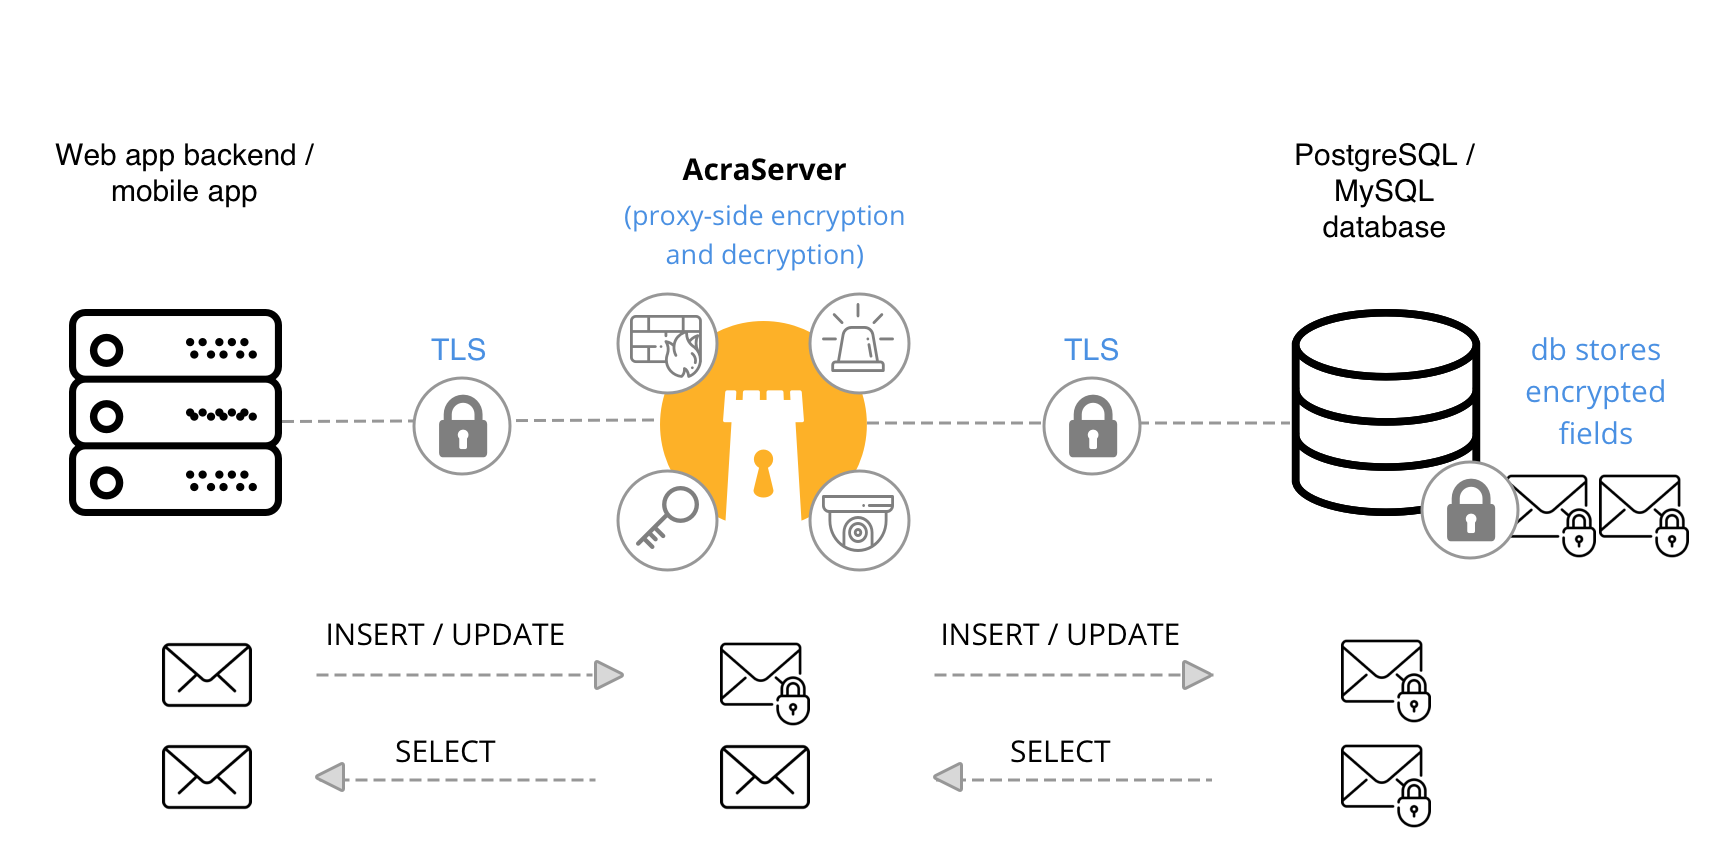 Cossack Labs Acra Server works as database proxy and encrypts/decrypts sensitive data fields transparently